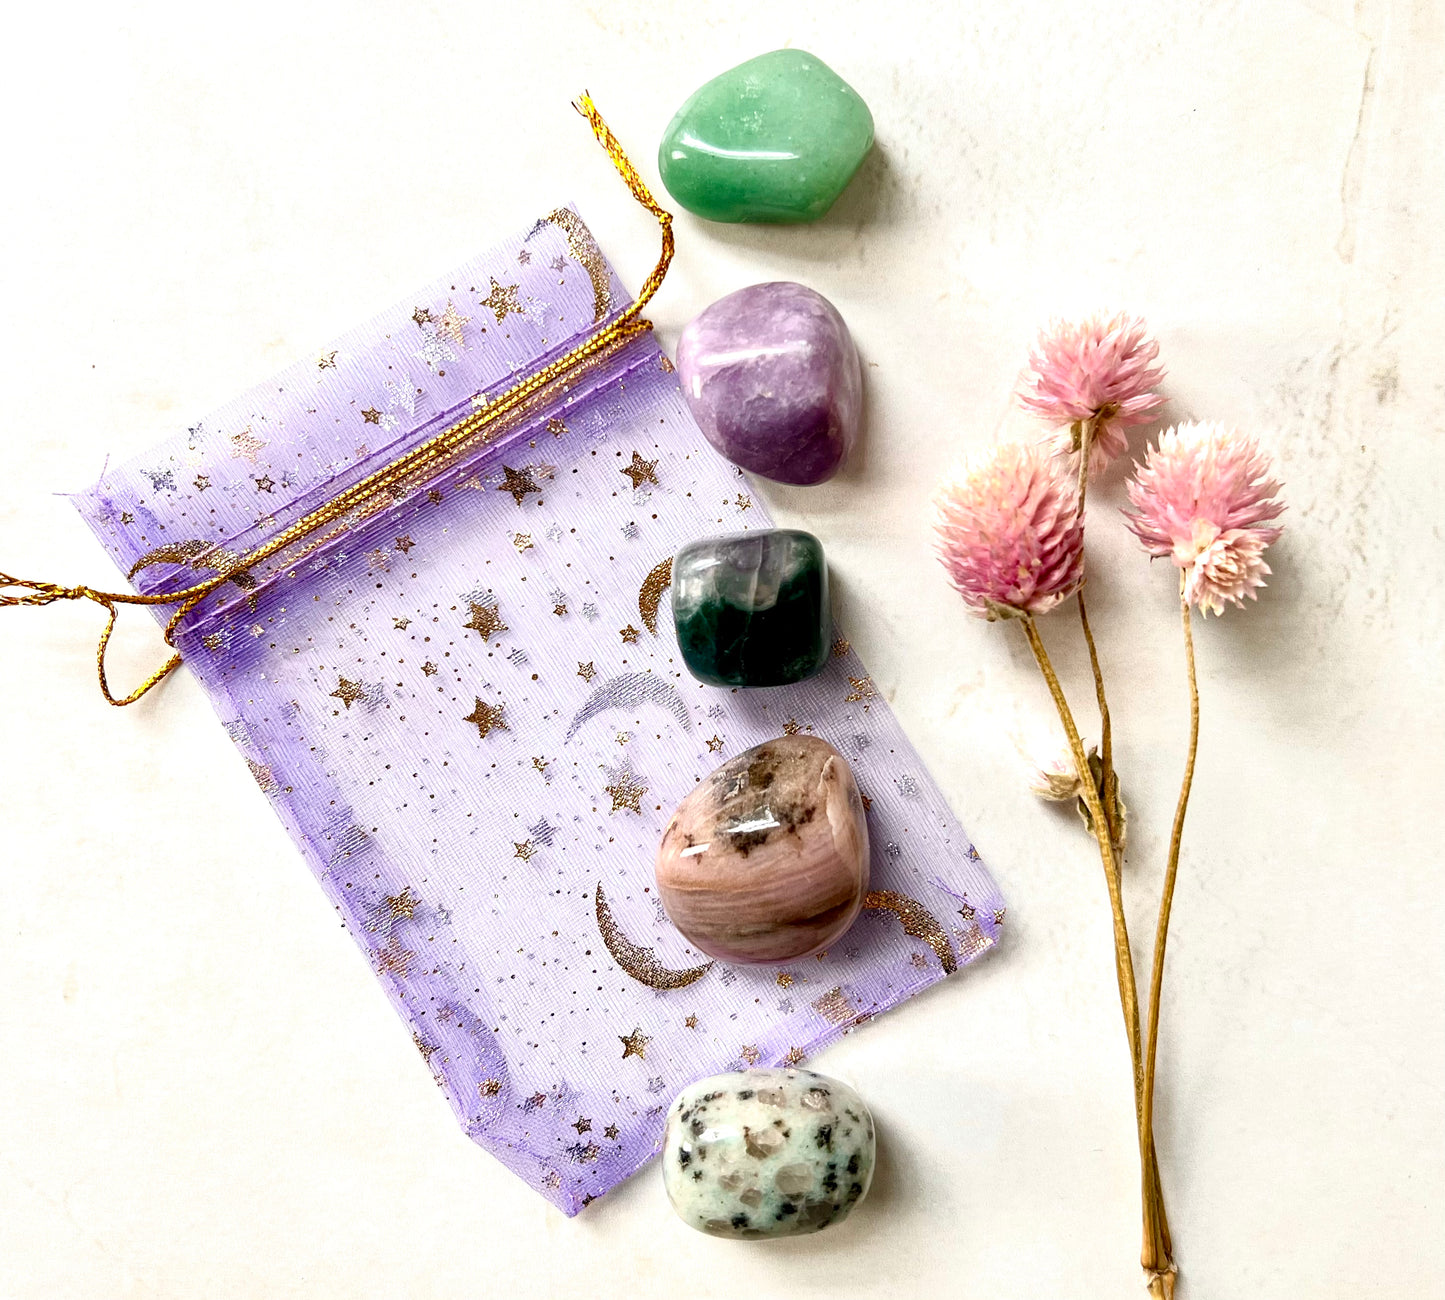 Rebirth and Renewal Crystals Set - Crystals for Inner Healing - Crystals for Transformation